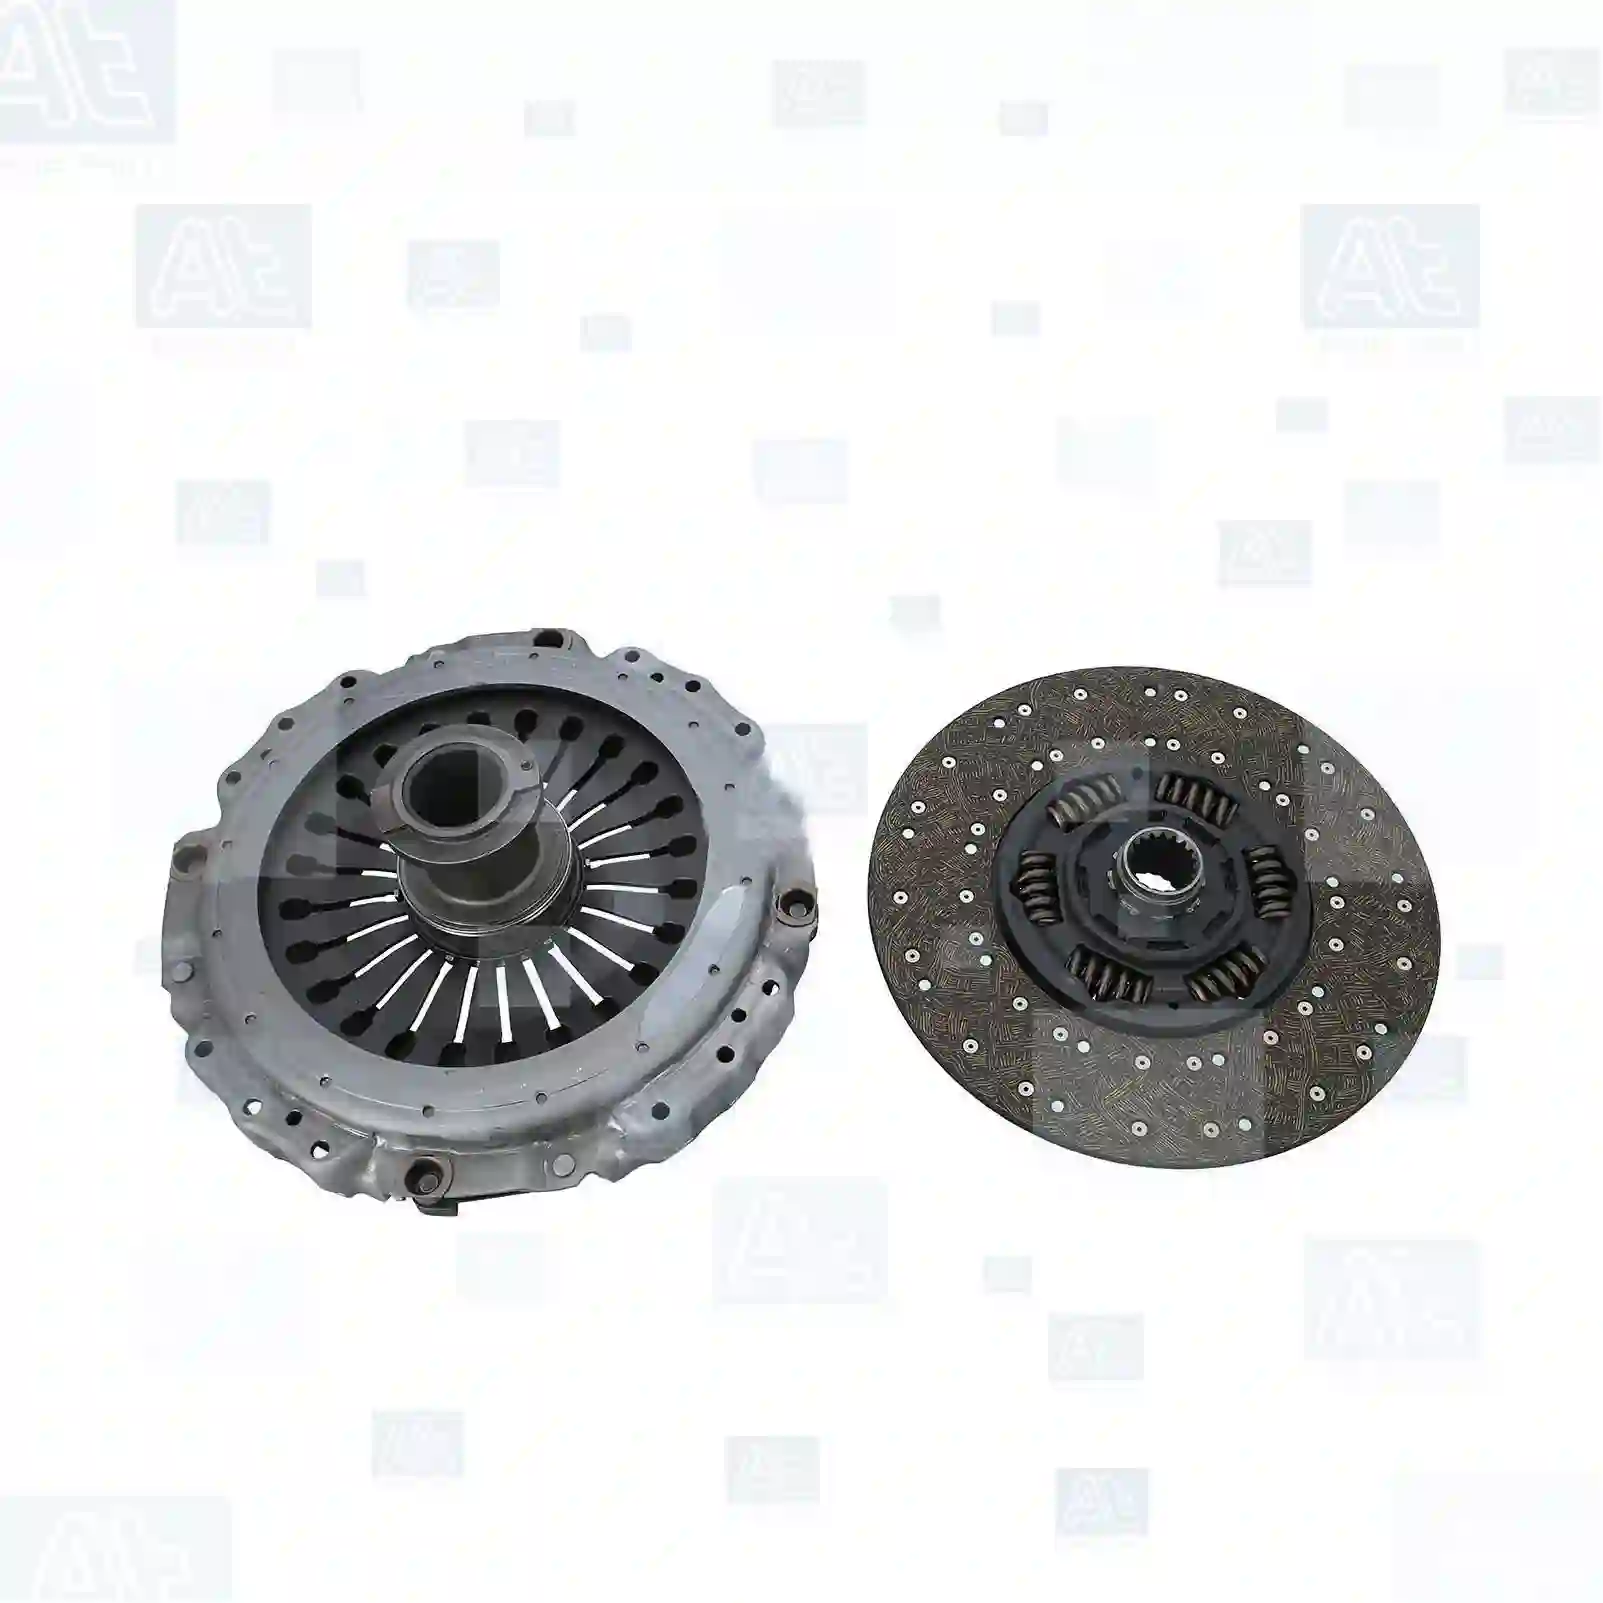 Clutch kit, at no 77722579, oem no: 0012509701, 0182509101, 018250910180, 0182509901, 018250990180, 0192500001, 019250000180, 0192500101, 019250010180, 0192500501, 0202505601, 020250560180, 0202508501, 020250850180, 0202508601, 0202508901, 020250890180, 0212500601, 021250060180, 0212500801, 021250080180, 0212504201, 0212504301, 0212506201, 0212506301, 0212508601, 0212509401, 0212509501, 0212509701, 0222500901, 0222501101, 0222501501, 0222503801, 0222505601, 0222505701, 0225505701, 0232507501, 0242500501, 0242500601, 0242500801, 0242507501, 0252508401, 0252508501, 0262503601, 0262504301, 0262504401, 0262504501, 0262504901, 0262505301, 0262506801, 0262506901, 0262509101, 0262509201, 0272501101, 0272501201, 0282501401, 0282501501, 0282502001, 0282502101 At Spare Part | Engine, Accelerator Pedal, Camshaft, Connecting Rod, Crankcase, Crankshaft, Cylinder Head, Engine Suspension Mountings, Exhaust Manifold, Exhaust Gas Recirculation, Filter Kits, Flywheel Housing, General Overhaul Kits, Engine, Intake Manifold, Oil Cleaner, Oil Cooler, Oil Filter, Oil Pump, Oil Sump, Piston & Liner, Sensor & Switch, Timing Case, Turbocharger, Cooling System, Belt Tensioner, Coolant Filter, Coolant Pipe, Corrosion Prevention Agent, Drive, Expansion Tank, Fan, Intercooler, Monitors & Gauges, Radiator, Thermostat, V-Belt / Timing belt, Water Pump, Fuel System, Electronical Injector Unit, Feed Pump, Fuel Filter, cpl., Fuel Gauge Sender,  Fuel Line, Fuel Pump, Fuel Tank, Injection Line Kit, Injection Pump, Exhaust System, Clutch & Pedal, Gearbox, Propeller Shaft, Axles, Brake System, Hubs & Wheels, Suspension, Leaf Spring, Universal Parts / Accessories, Steering, Electrical System, Cabin Clutch kit, at no 77722579, oem no: 0012509701, 0182509101, 018250910180, 0182509901, 018250990180, 0192500001, 019250000180, 0192500101, 019250010180, 0192500501, 0202505601, 020250560180, 0202508501, 020250850180, 0202508601, 0202508901, 020250890180, 0212500601, 021250060180, 0212500801, 021250080180, 0212504201, 0212504301, 0212506201, 0212506301, 0212508601, 0212509401, 0212509501, 0212509701, 0222500901, 0222501101, 0222501501, 0222503801, 0222505601, 0222505701, 0225505701, 0232507501, 0242500501, 0242500601, 0242500801, 0242507501, 0252508401, 0252508501, 0262503601, 0262504301, 0262504401, 0262504501, 0262504901, 0262505301, 0262506801, 0262506901, 0262509101, 0262509201, 0272501101, 0272501201, 0282501401, 0282501501, 0282502001, 0282502101 At Spare Part | Engine, Accelerator Pedal, Camshaft, Connecting Rod, Crankcase, Crankshaft, Cylinder Head, Engine Suspension Mountings, Exhaust Manifold, Exhaust Gas Recirculation, Filter Kits, Flywheel Housing, General Overhaul Kits, Engine, Intake Manifold, Oil Cleaner, Oil Cooler, Oil Filter, Oil Pump, Oil Sump, Piston & Liner, Sensor & Switch, Timing Case, Turbocharger, Cooling System, Belt Tensioner, Coolant Filter, Coolant Pipe, Corrosion Prevention Agent, Drive, Expansion Tank, Fan, Intercooler, Monitors & Gauges, Radiator, Thermostat, V-Belt / Timing belt, Water Pump, Fuel System, Electronical Injector Unit, Feed Pump, Fuel Filter, cpl., Fuel Gauge Sender,  Fuel Line, Fuel Pump, Fuel Tank, Injection Line Kit, Injection Pump, Exhaust System, Clutch & Pedal, Gearbox, Propeller Shaft, Axles, Brake System, Hubs & Wheels, Suspension, Leaf Spring, Universal Parts / Accessories, Steering, Electrical System, Cabin